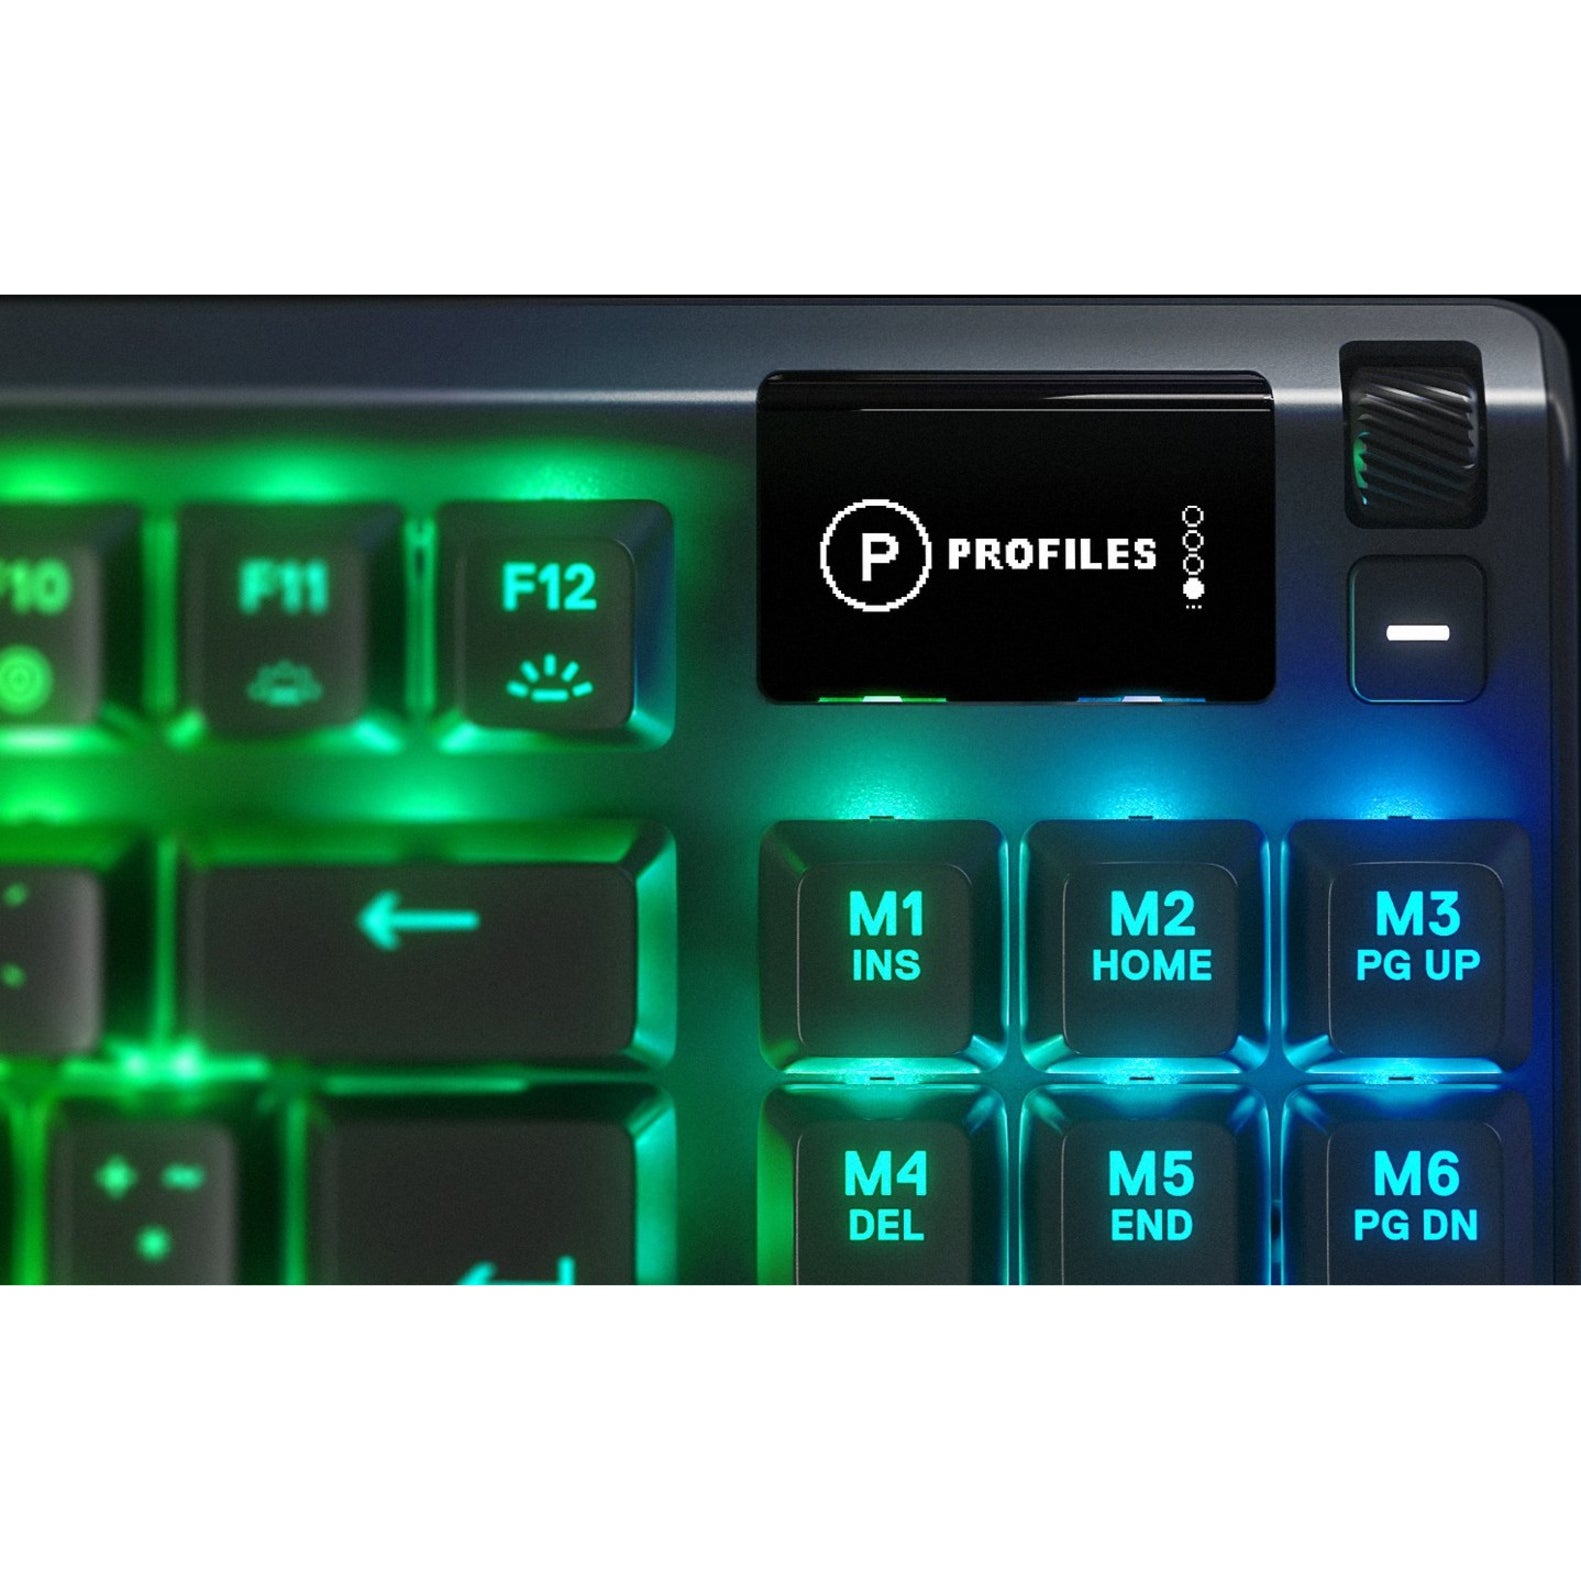 SteelSeries Apex PRO TKL Keyboard - Mechanical Keyswitch Technology, USB Connectivity [Discontinued]